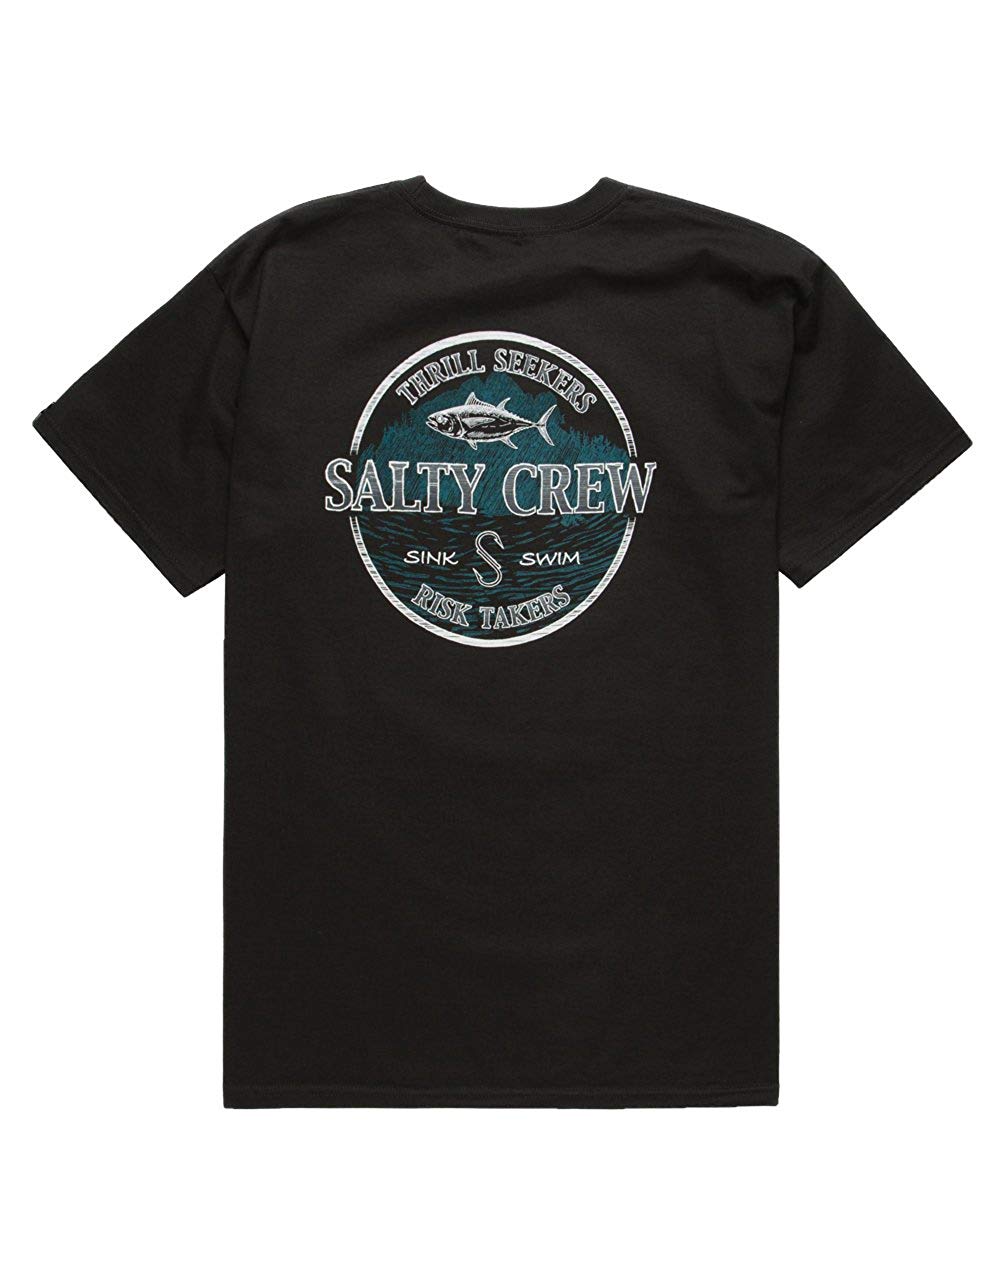 Salty Crew Logo - Salty Crew Land And Sea T Shirt, Black, Small: Clothing